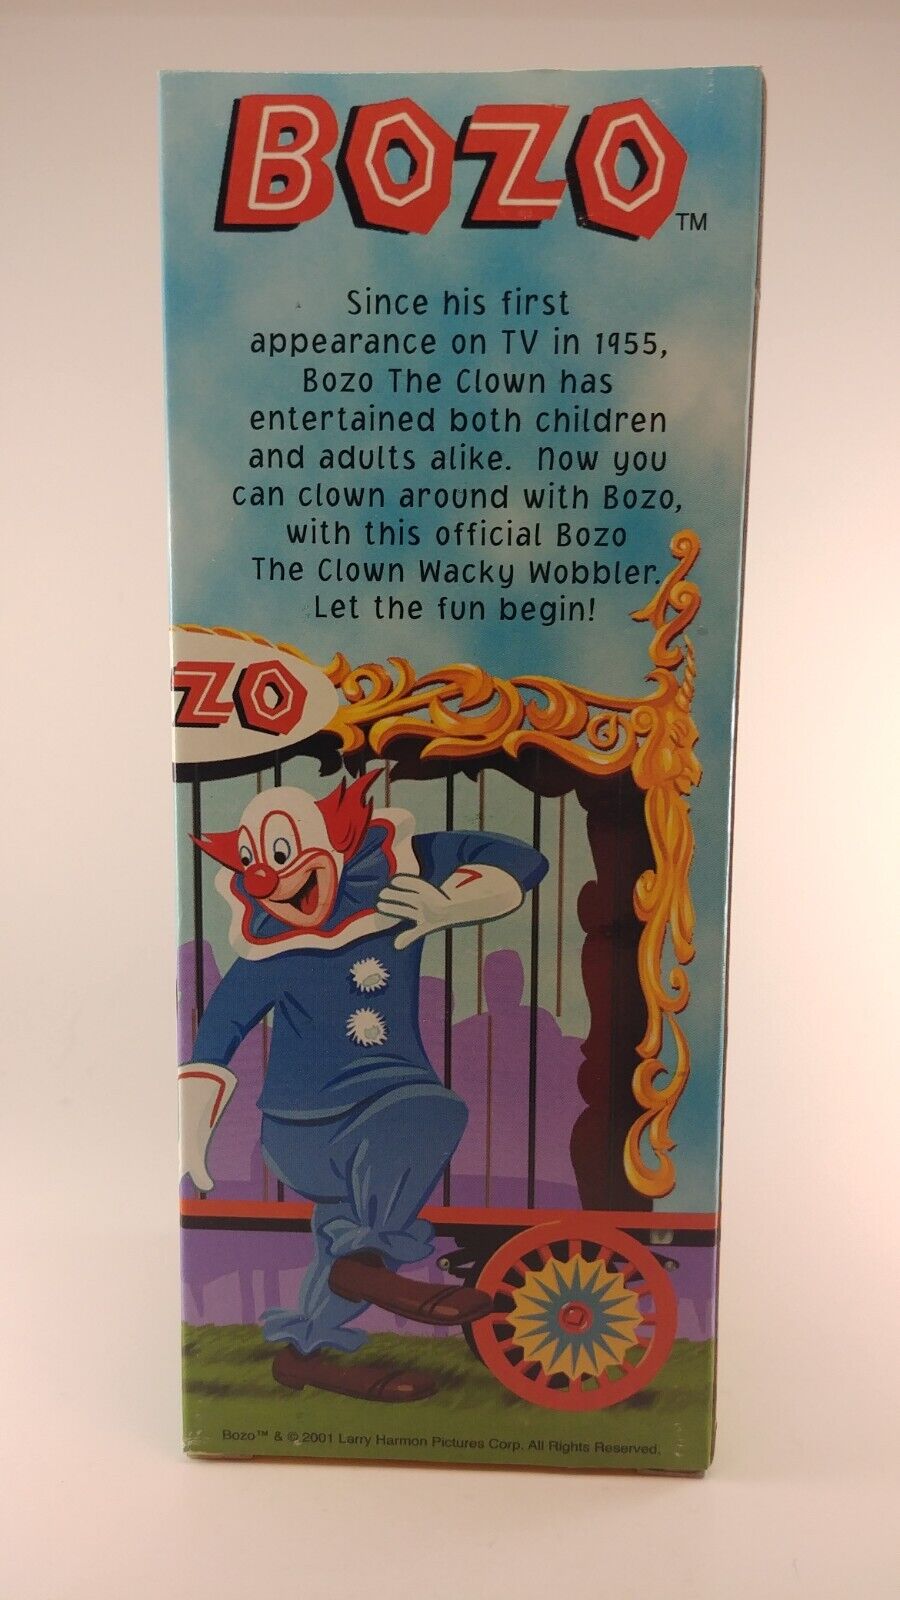 Bozo the Clown Wacky Wobbler from Funko, 2001 SOLD OUT